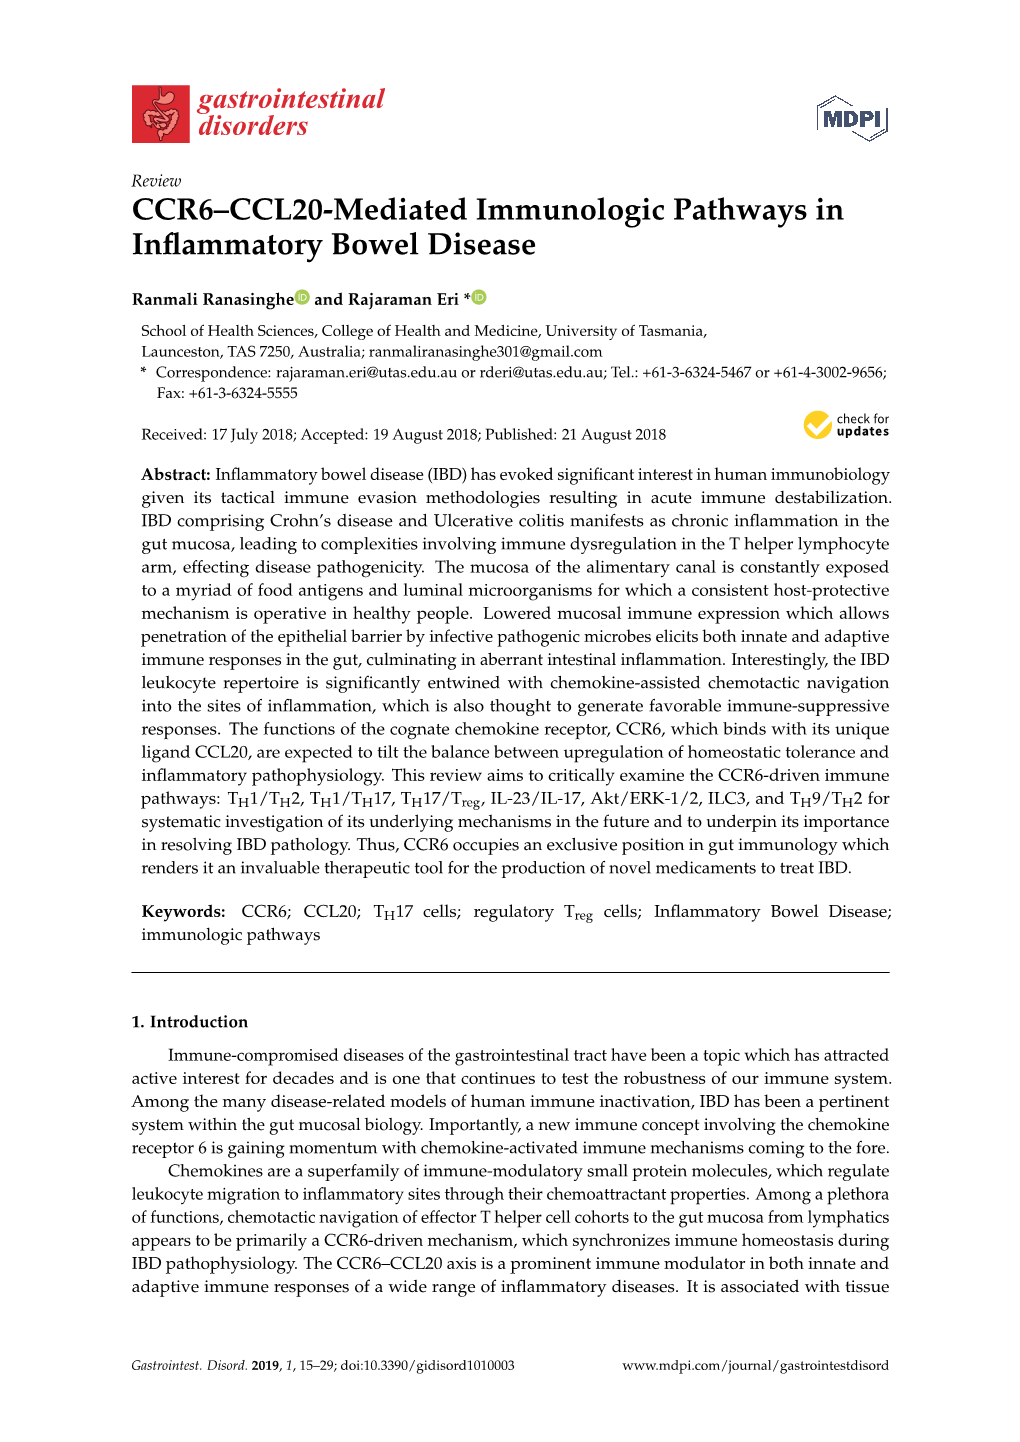 CCR6–CCL20-Mediated Immunologic Pathways in Inflammatory Bowel